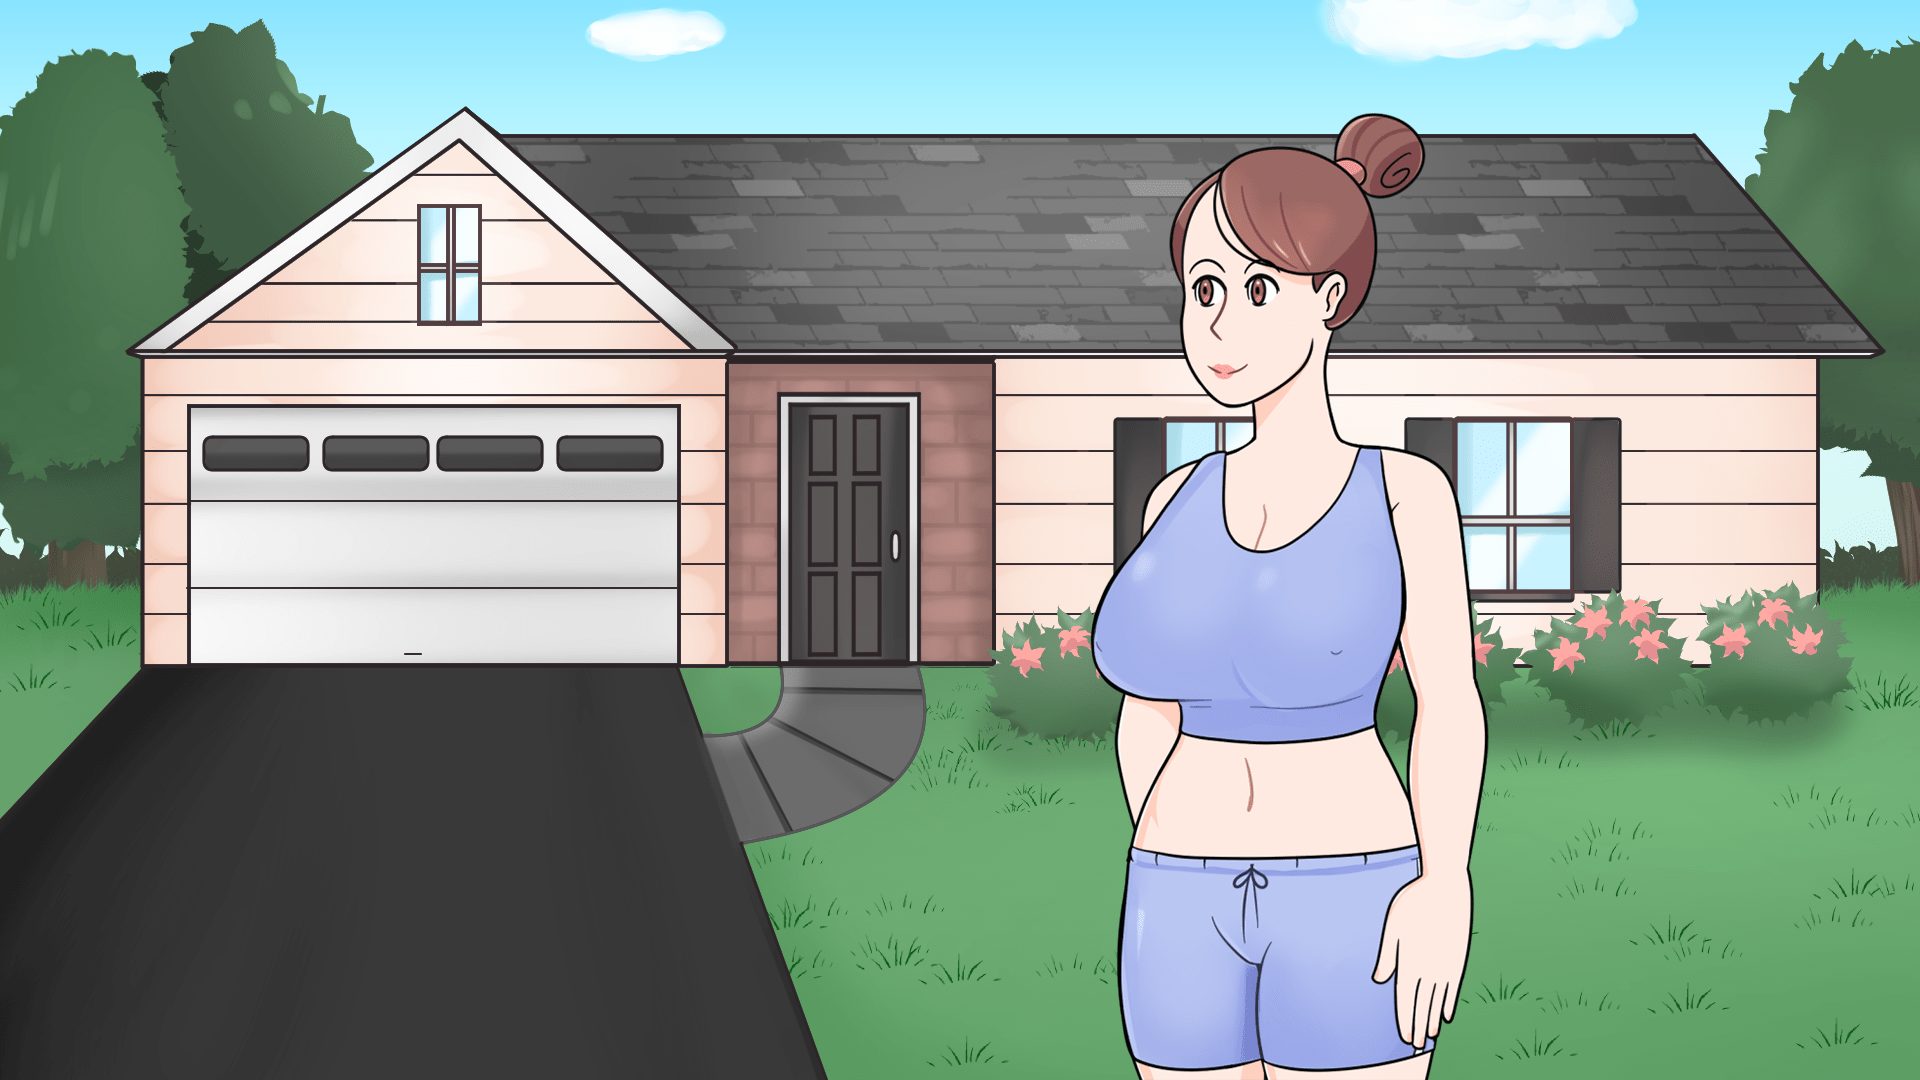 Big Tits Game Download - Dead-end game - Business of Loving APK 0.6.1 - Big tits Android Games -  Lewd Play